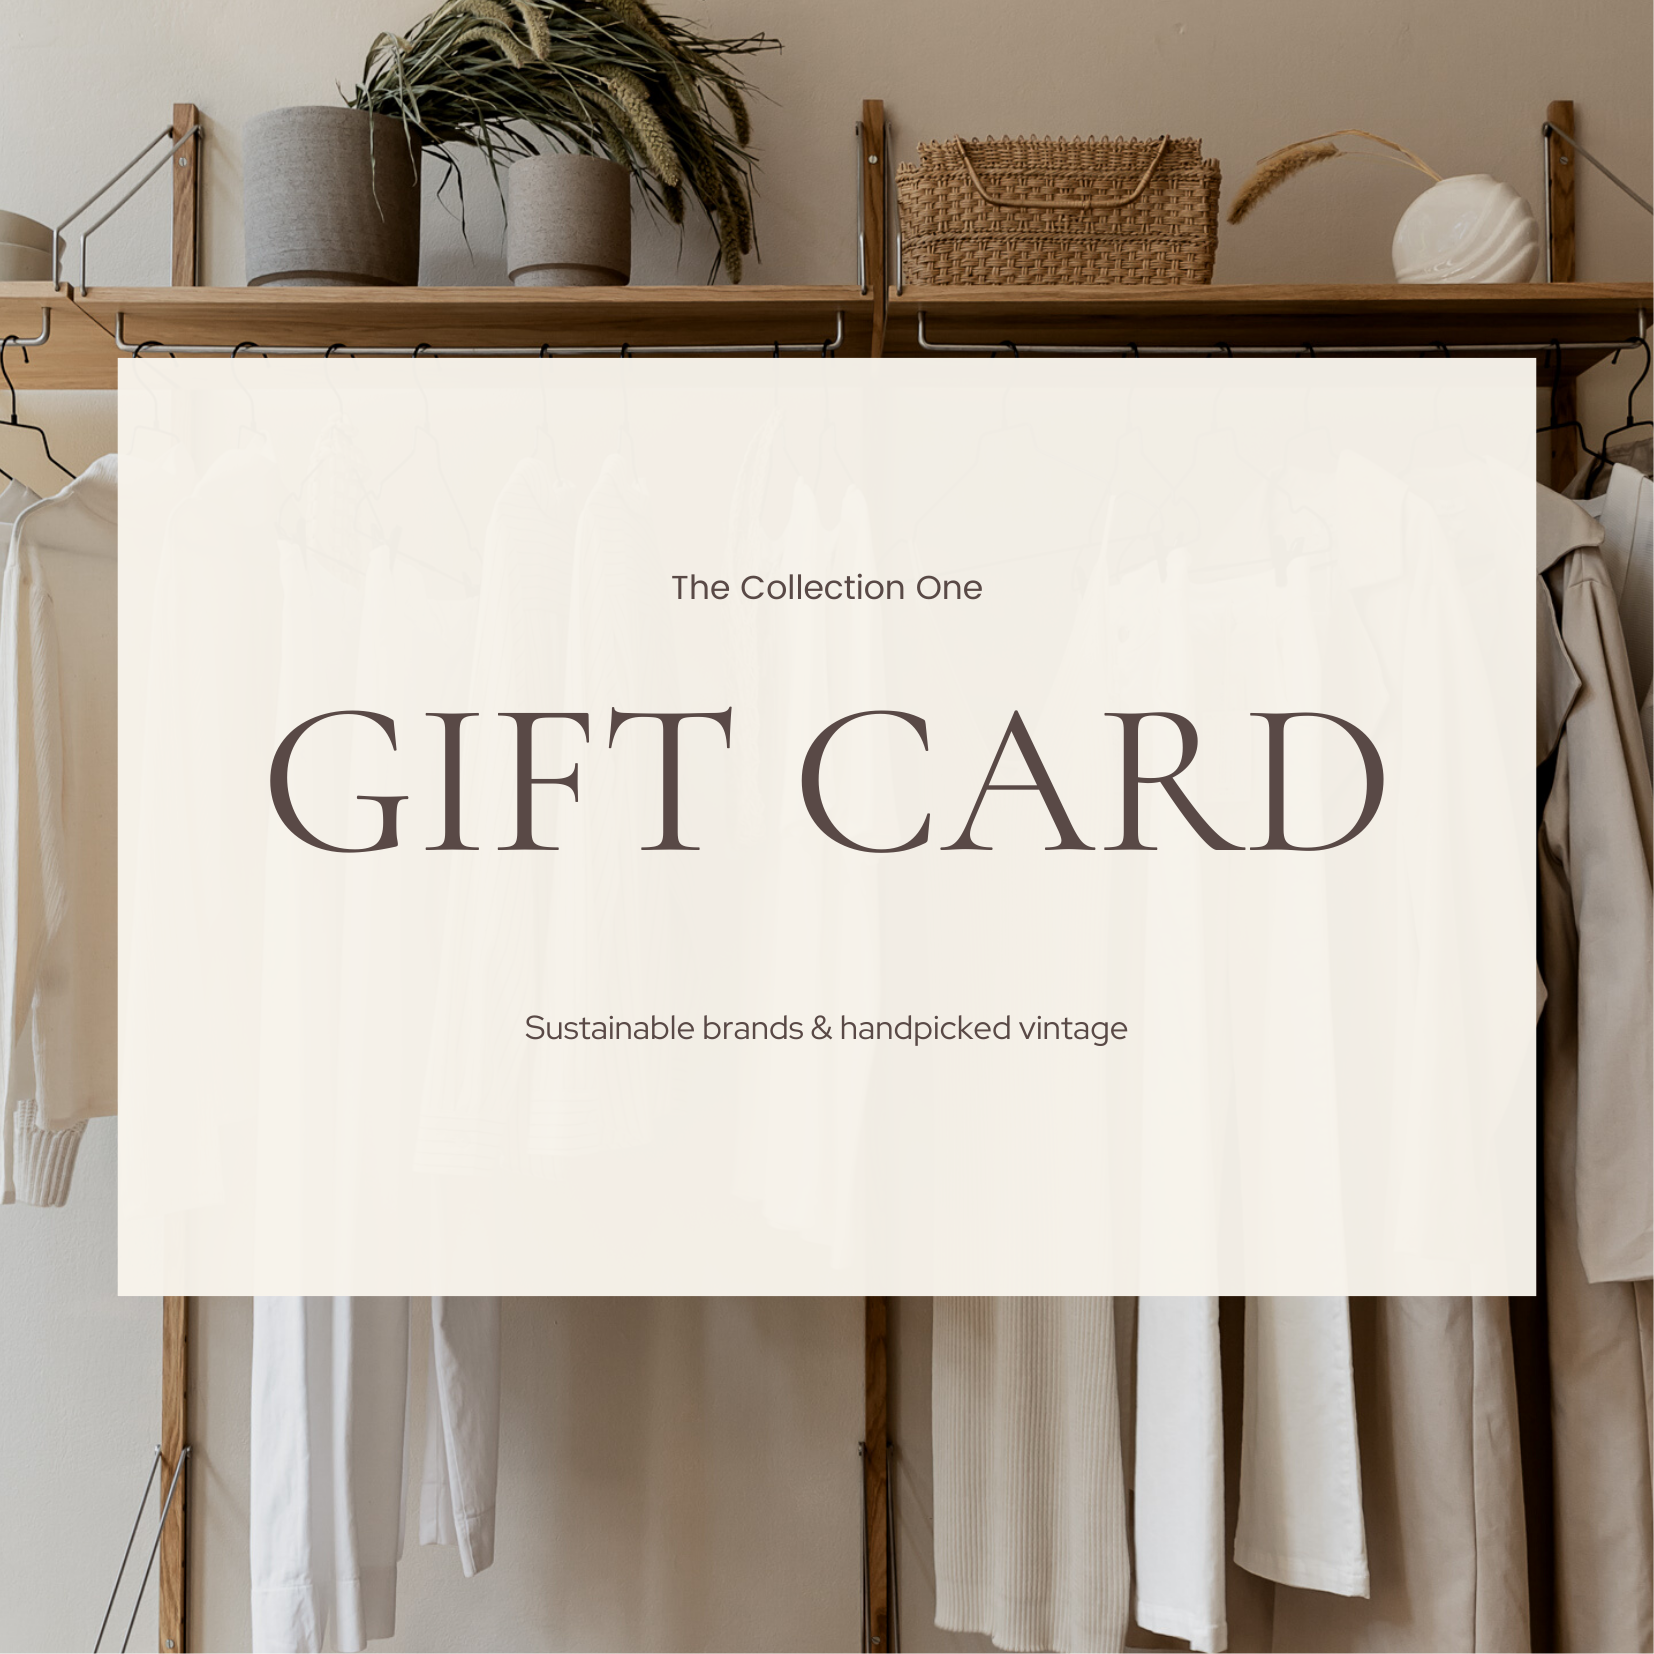 Physical Gift Card | The Collection One